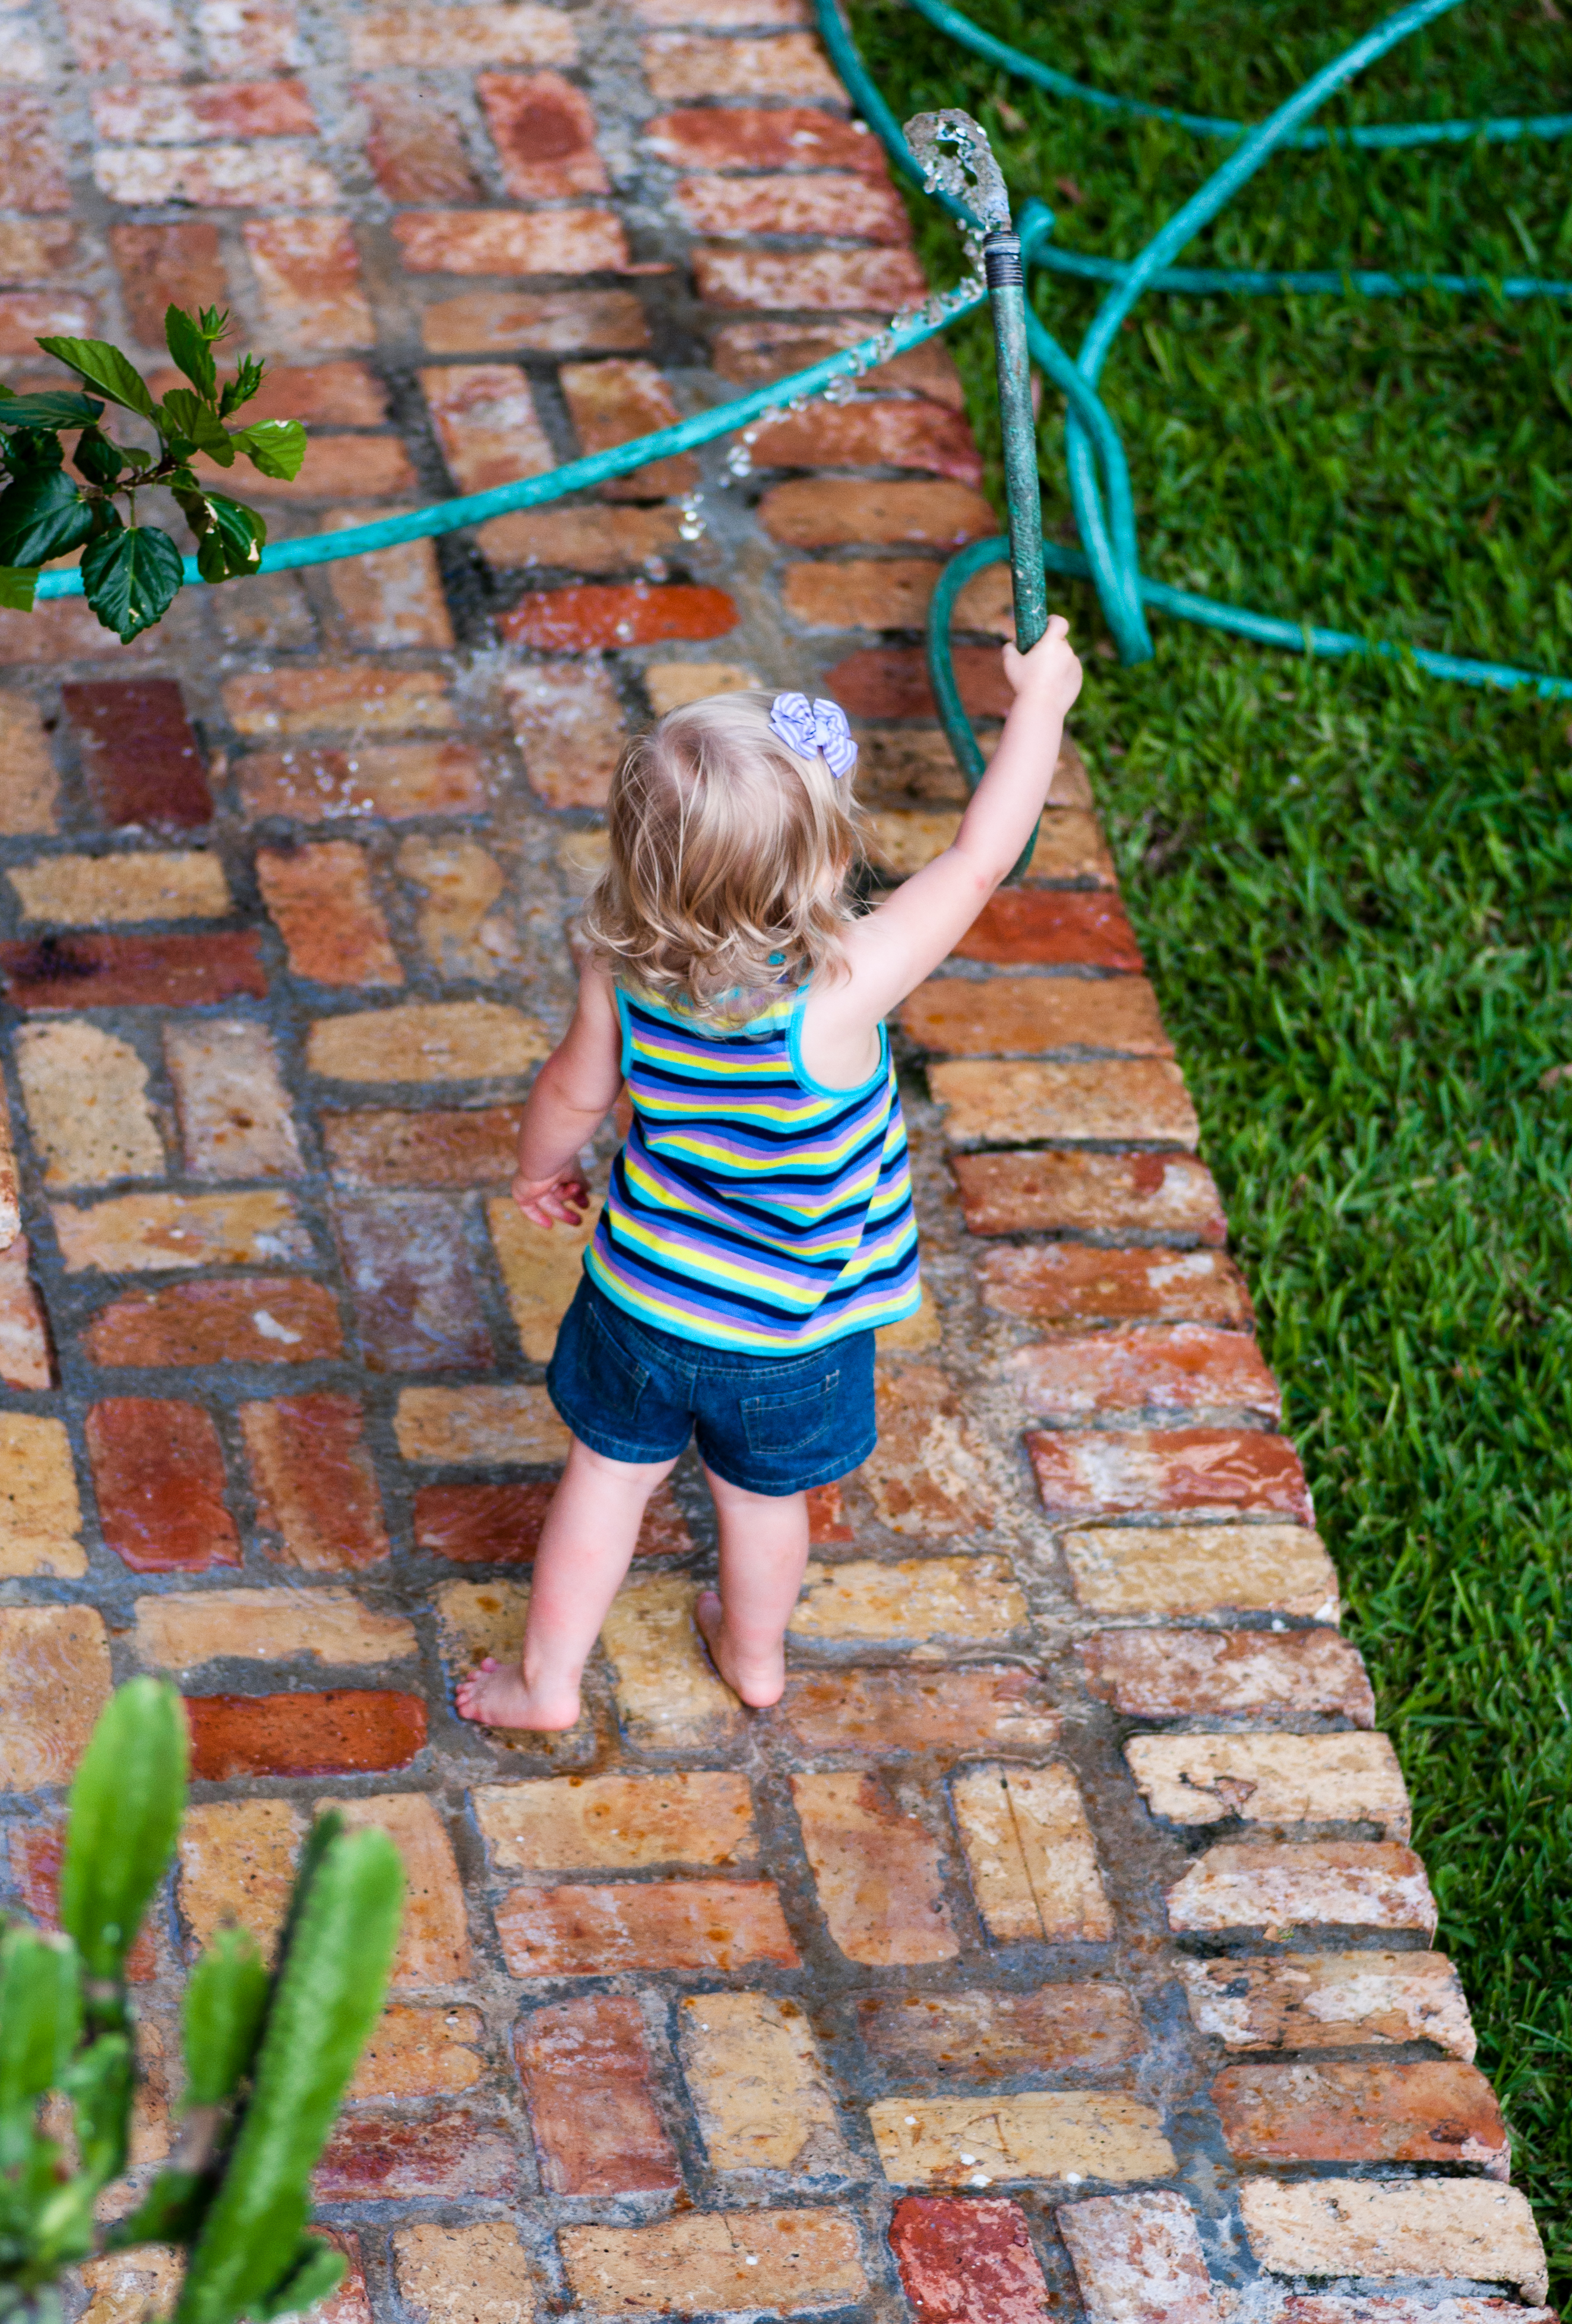 Young Girl playing in the backyard with a water hose